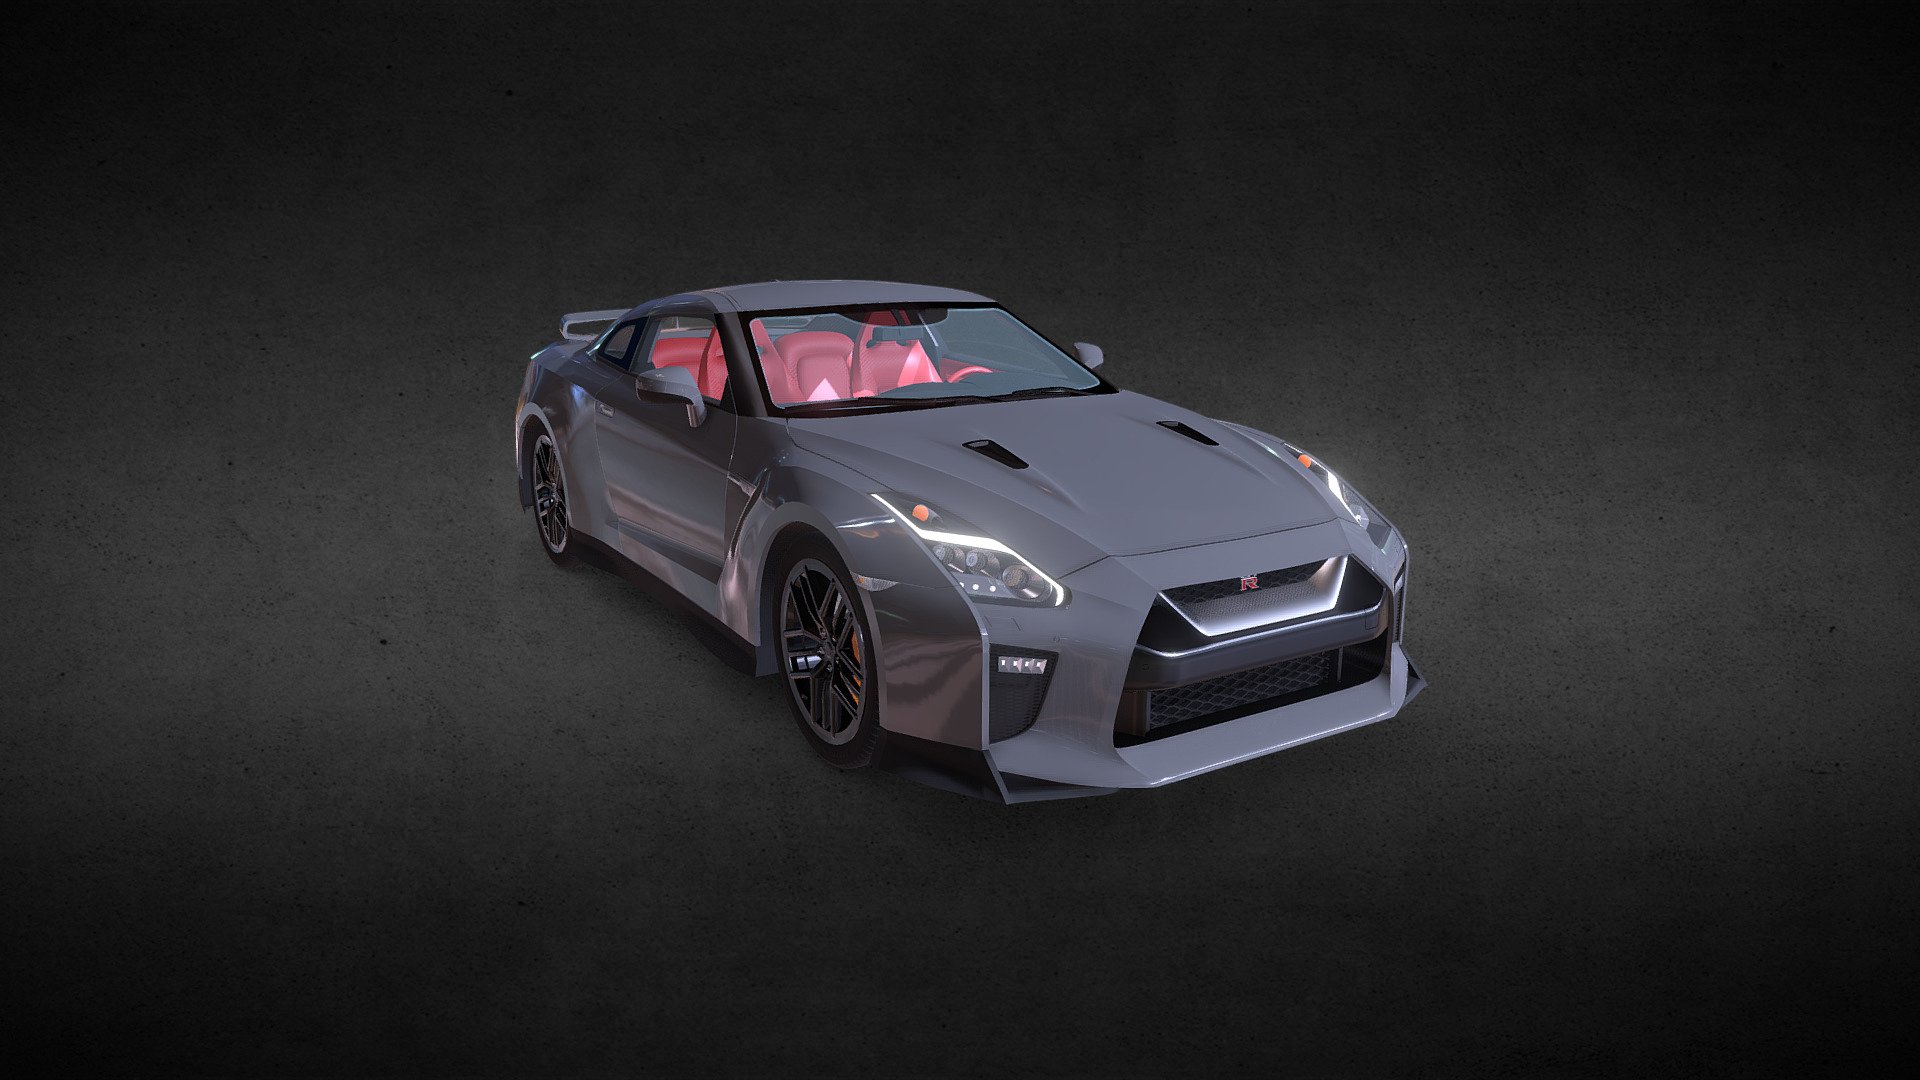 A high-poly version of my Nissan GT-R (after facelifting in 2016) model.

Created in Blender 2.90. Textures created in Inkscape.

Interior and chassis are simplified.

I hope you'd like it :) - 2016 Nissan GT-R (R35 FL) - 3D model by KrStolorz (Krzysztof Stolorz) (@KrStolorz) 3d model